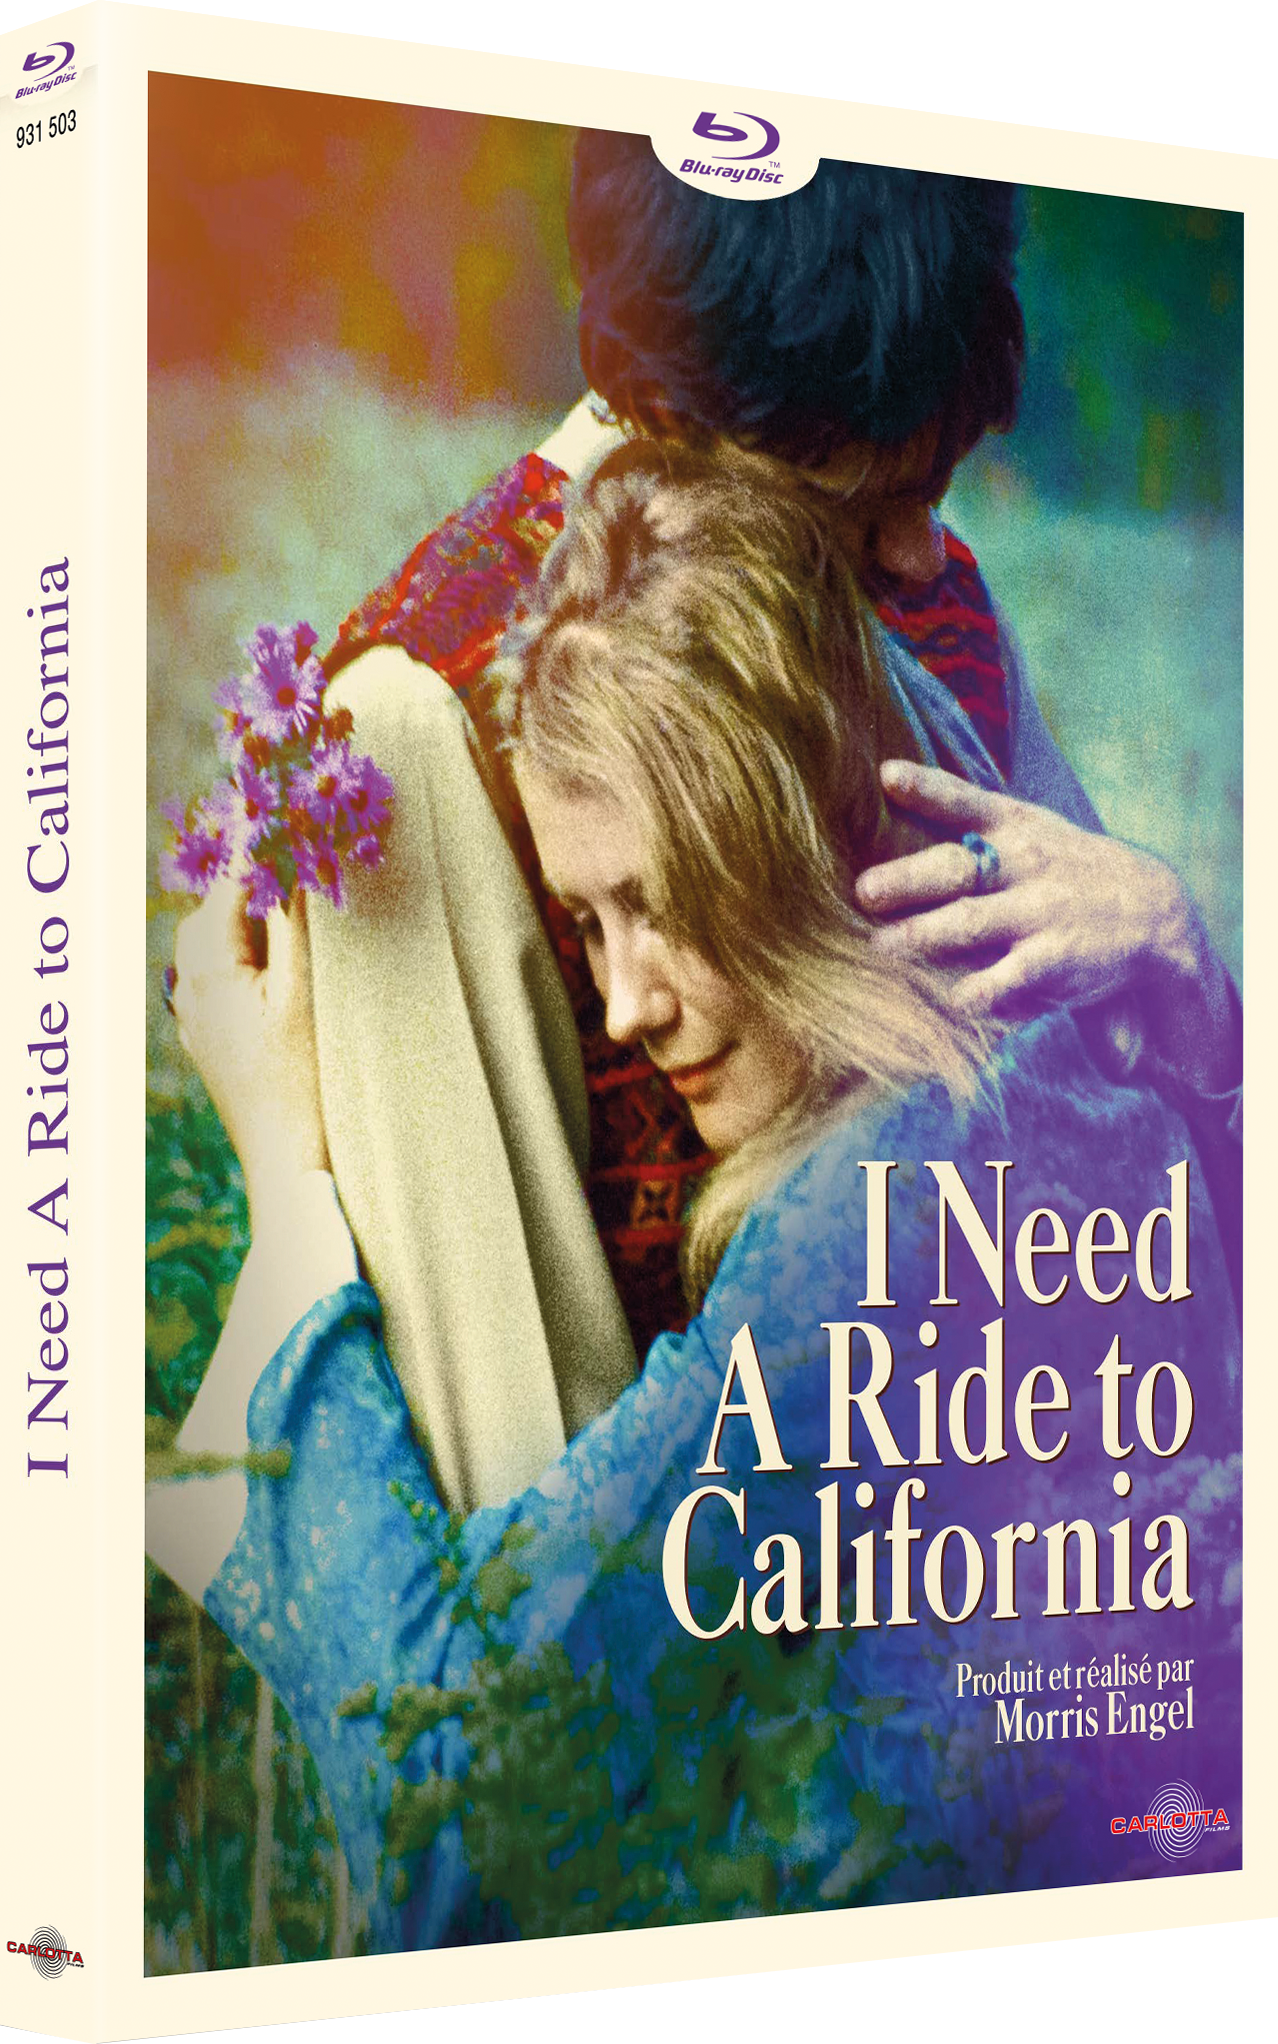 I Need A Ride to California by Morris Engel